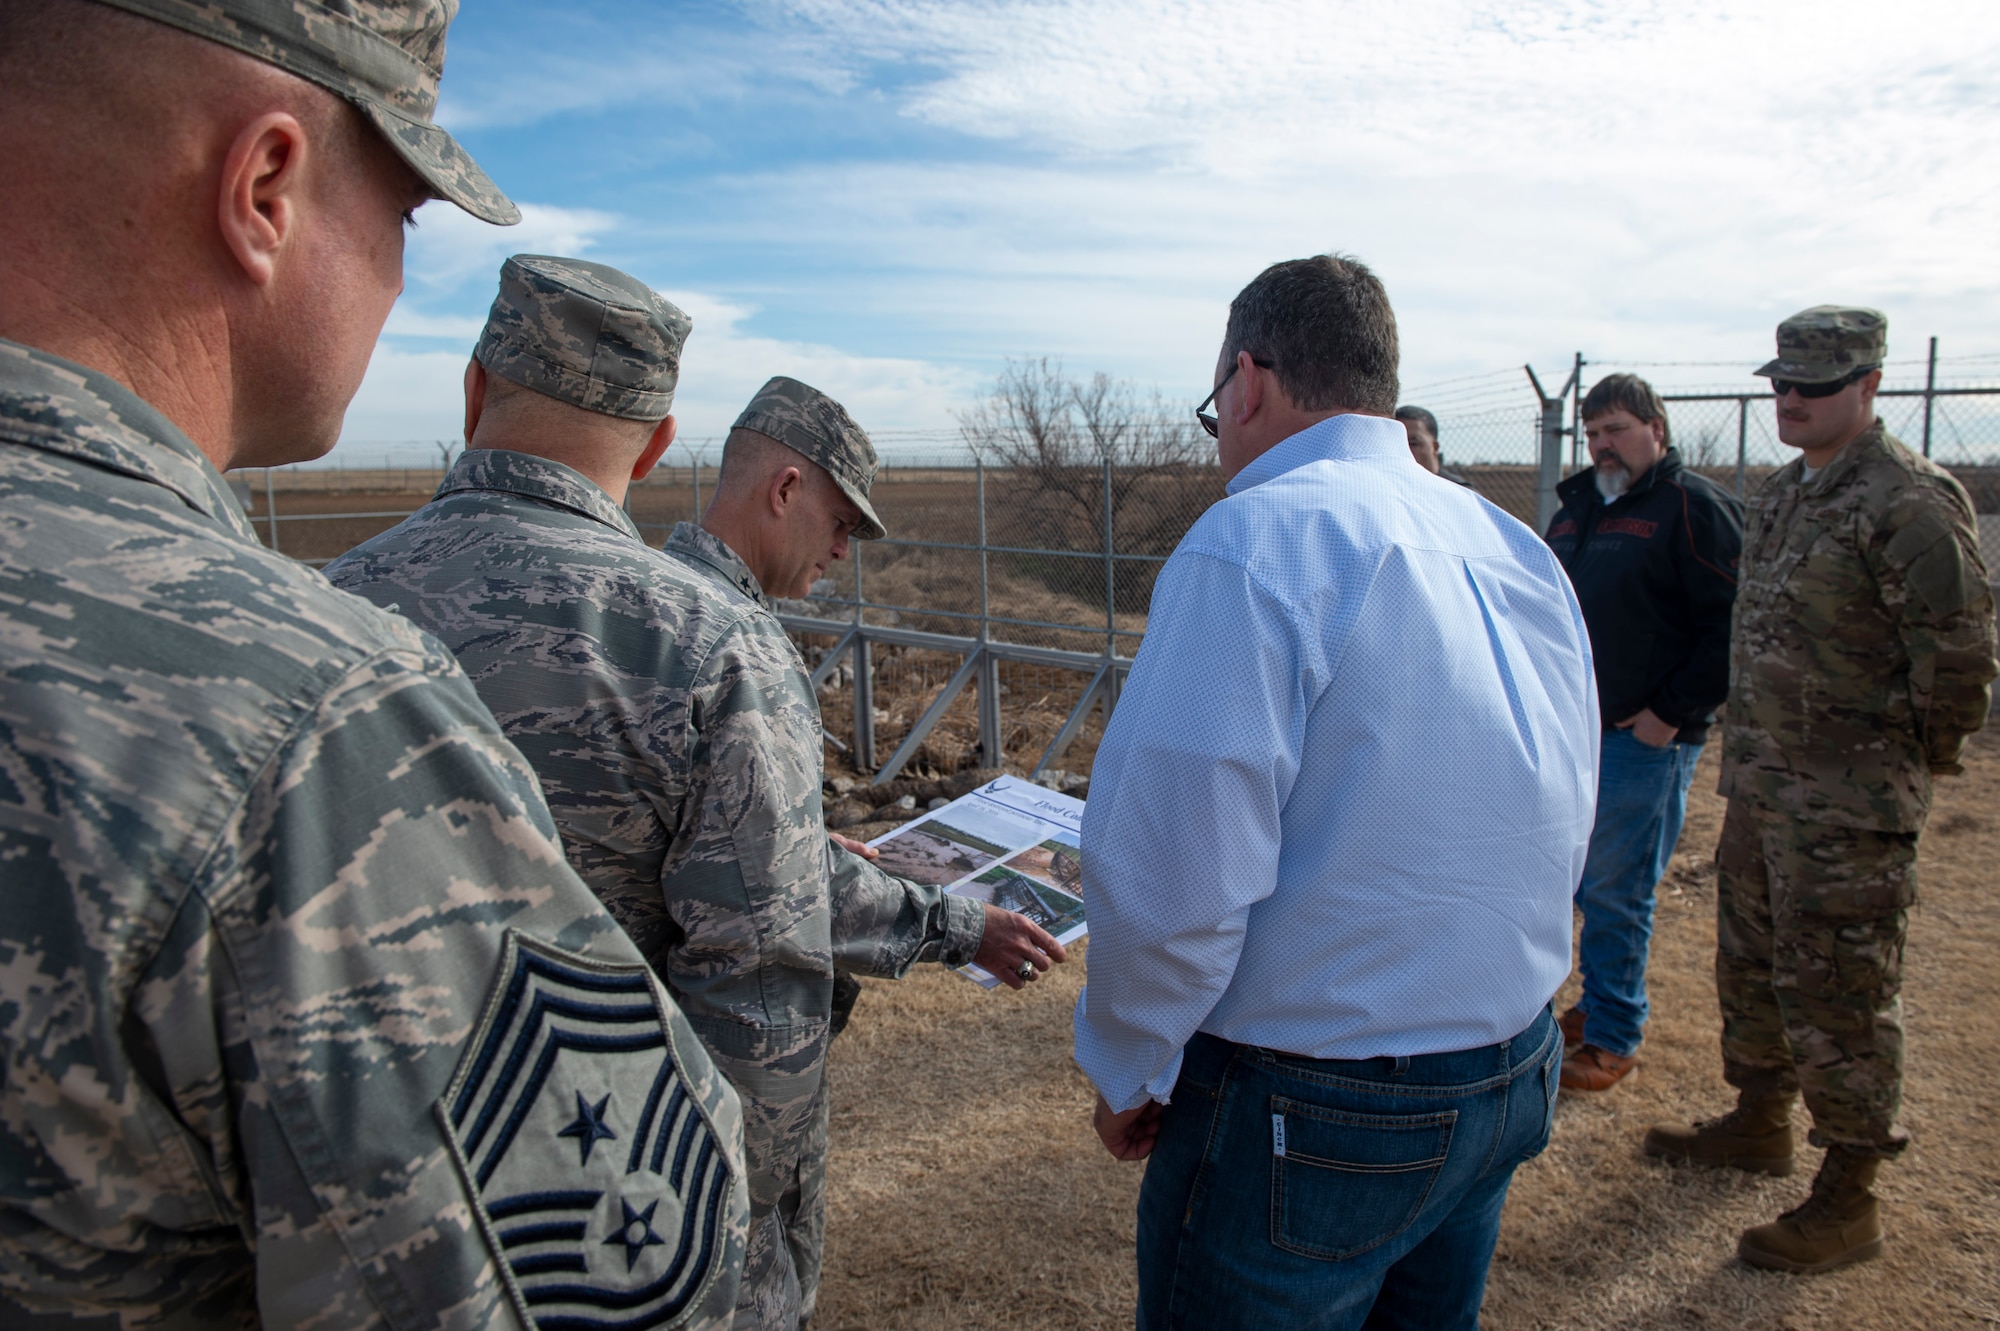 97th Civil Engineer Squadron operations flight shows the innovative improvements made to the gate to U.S. Air Force Lt. Gen. Steven Kwast, commander of Air Education and Training Command and 97th Air Mobility Wing leadership, Dec. 18, 2018, at Altus Air Force Base, Okla.  Several innovative accomplishments implemented by the 97th AMW were highlighted during the tour for Kwast. (U.S. Air Force photo by Senior Airman Cody Dowell)